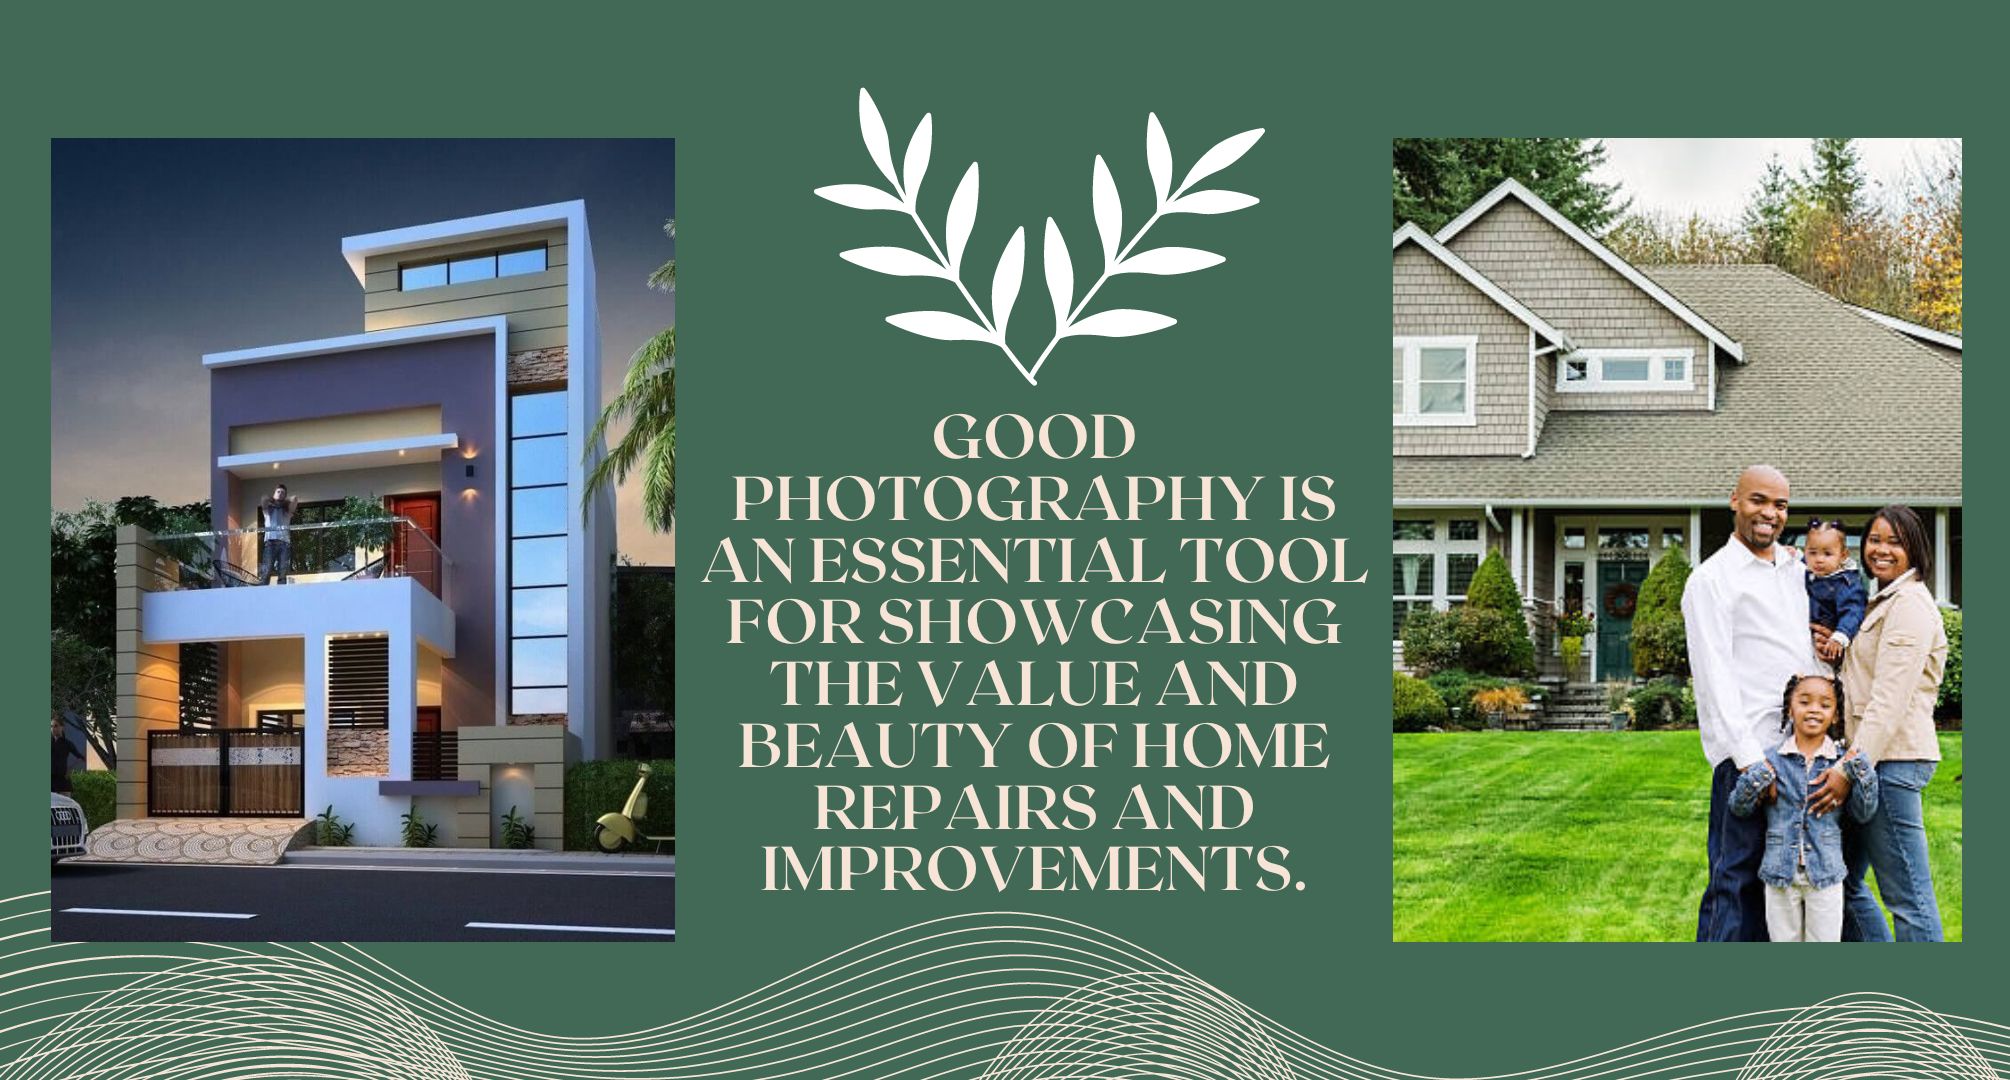 From Flaws to Fabulous How Good Photography Can Highlight the Beauty in Your Home Repairs and Improvements